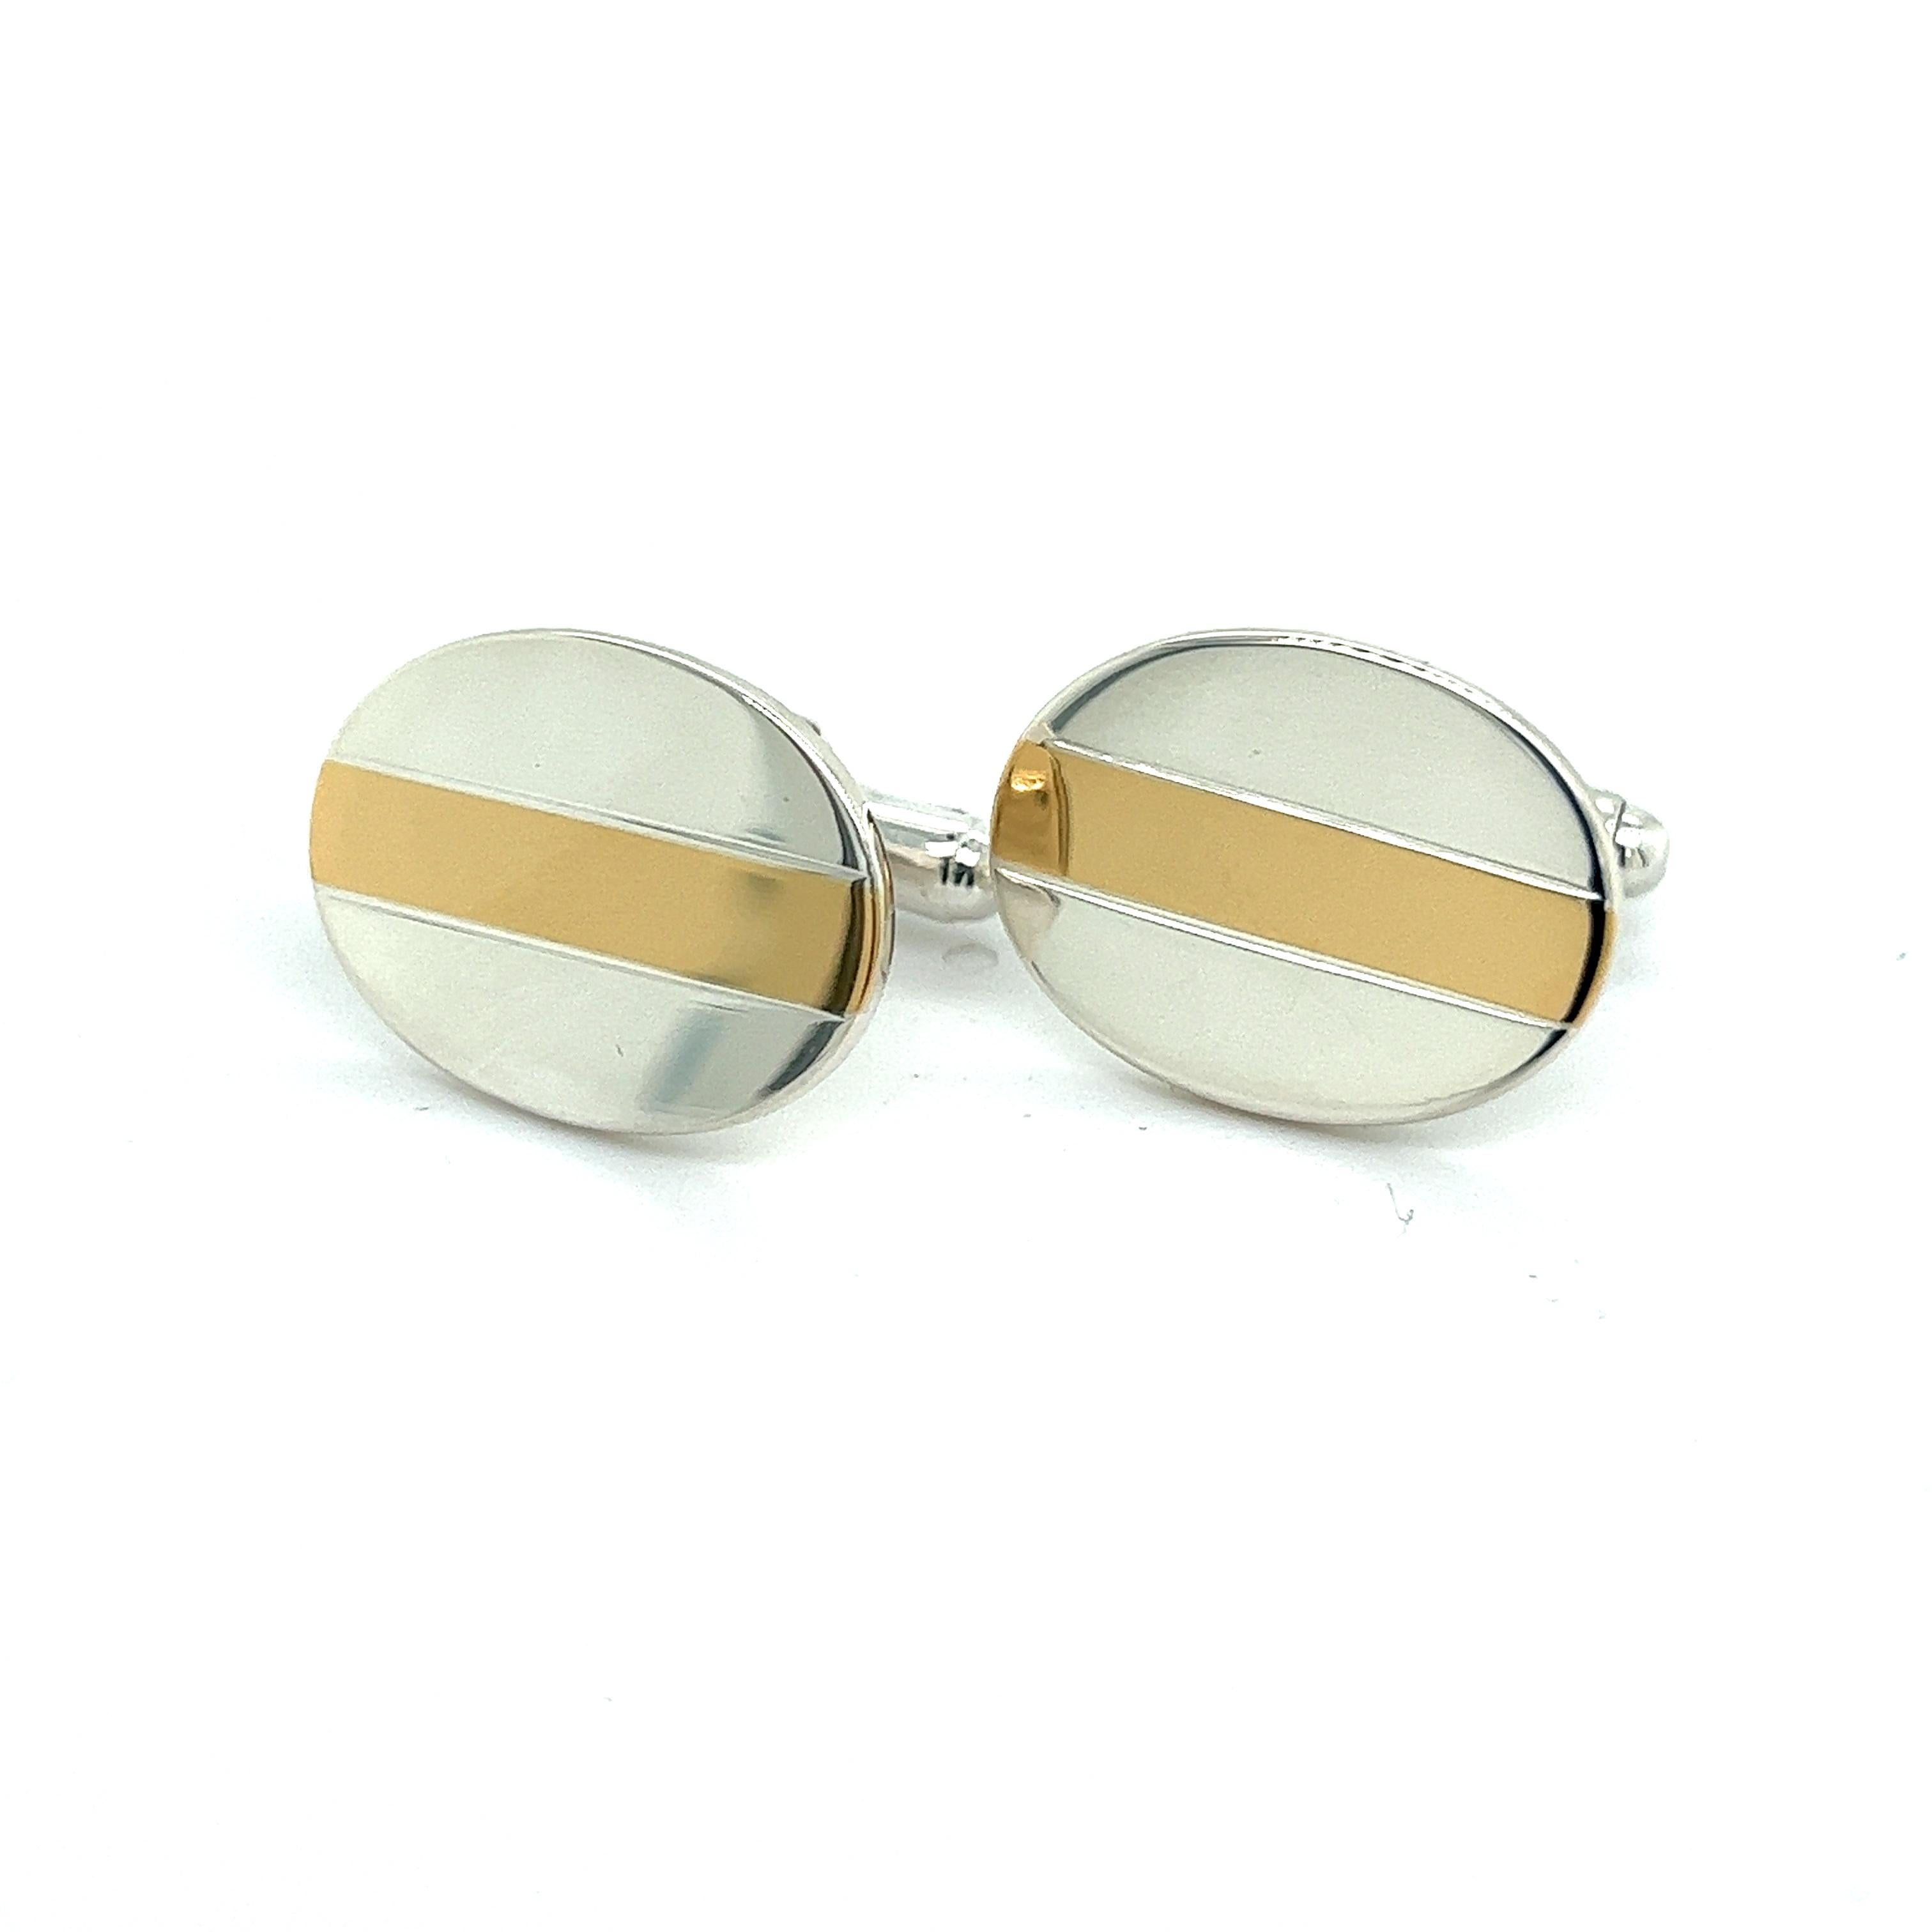 Tiffany & Co Estate Oval Cufflinks 18k YG + Sterling Silver In Good Condition For Sale In Brooklyn, NY